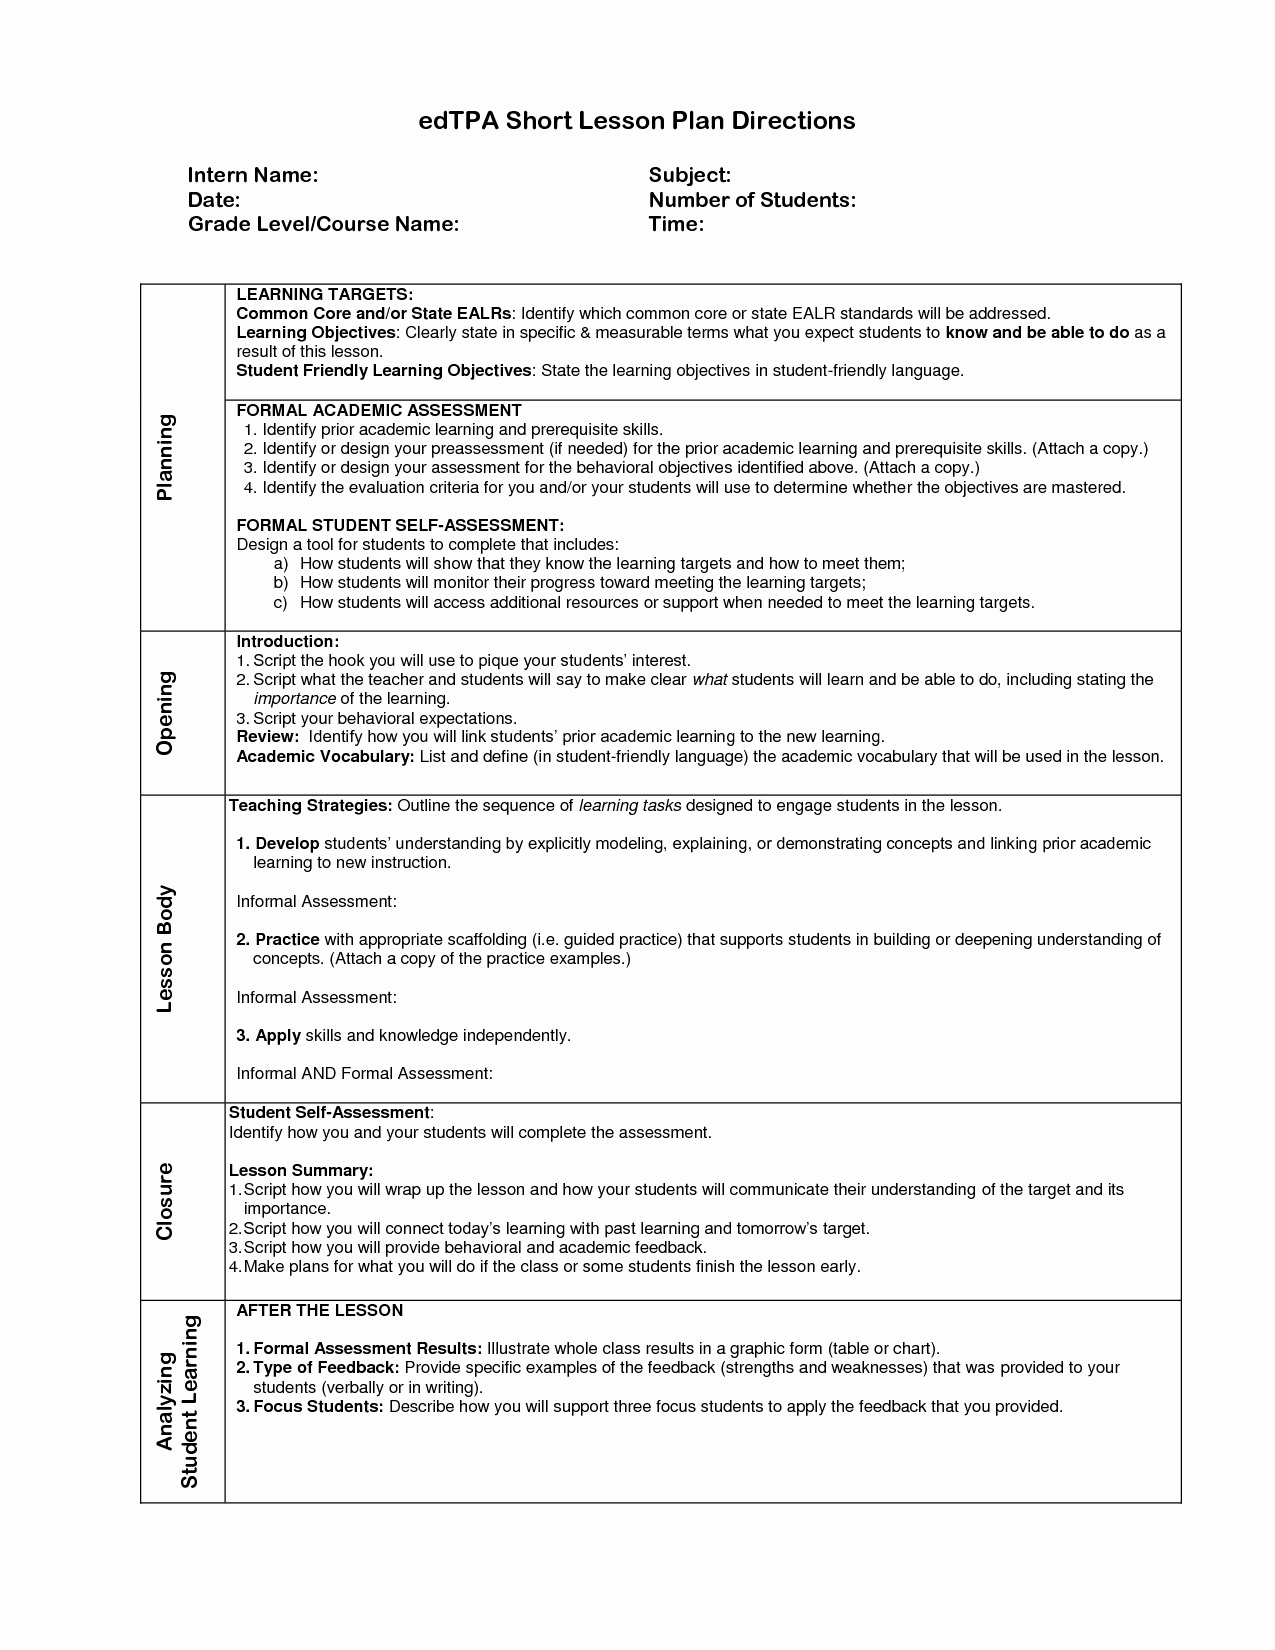 Example Lesson Plan Template Best Of Edtpa Lesson Plan Template Edtpa